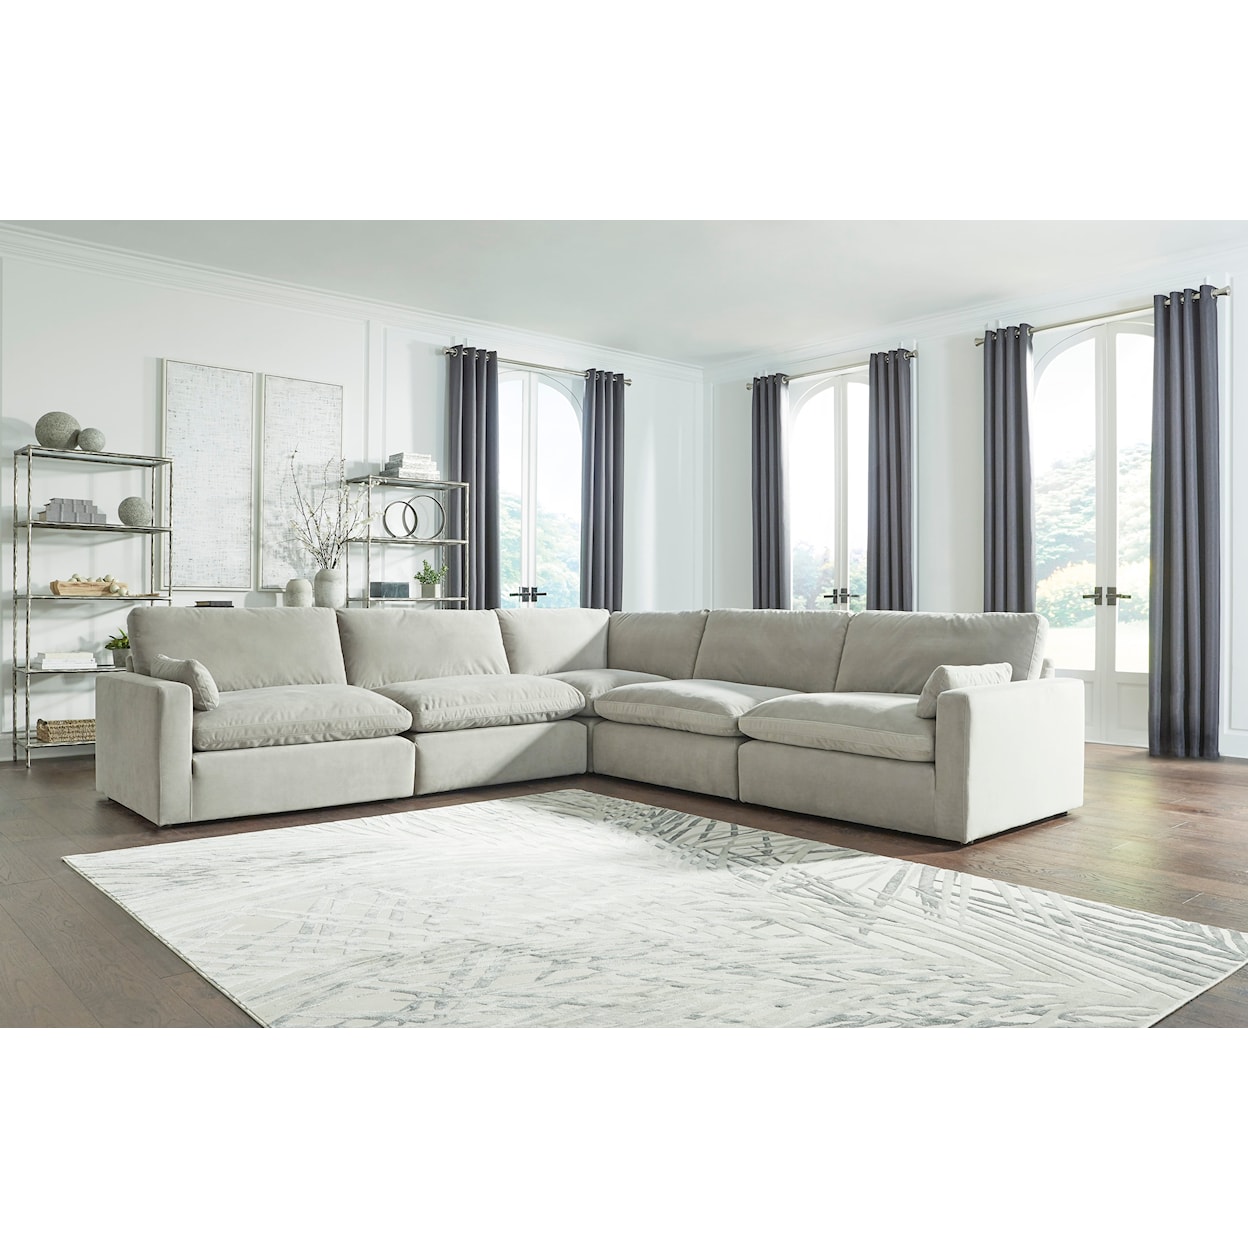 Benchcraft Sophie 5-Piece Sectional